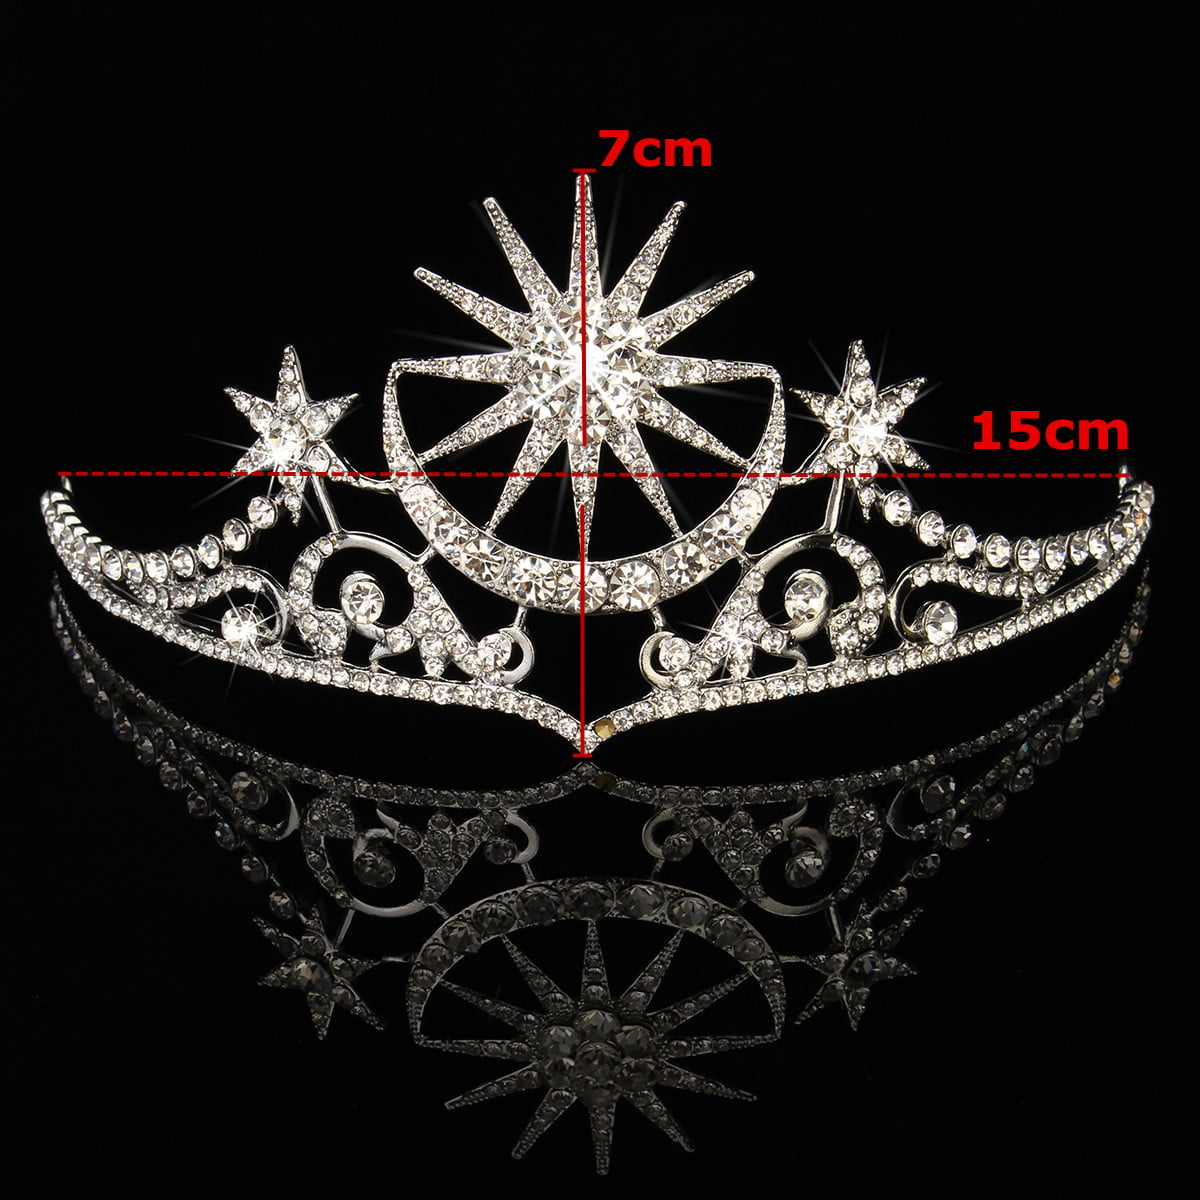 7cm High Crystal Tiara Earrings Set Wedding Party Pageant Prom Crown 2 Colours 